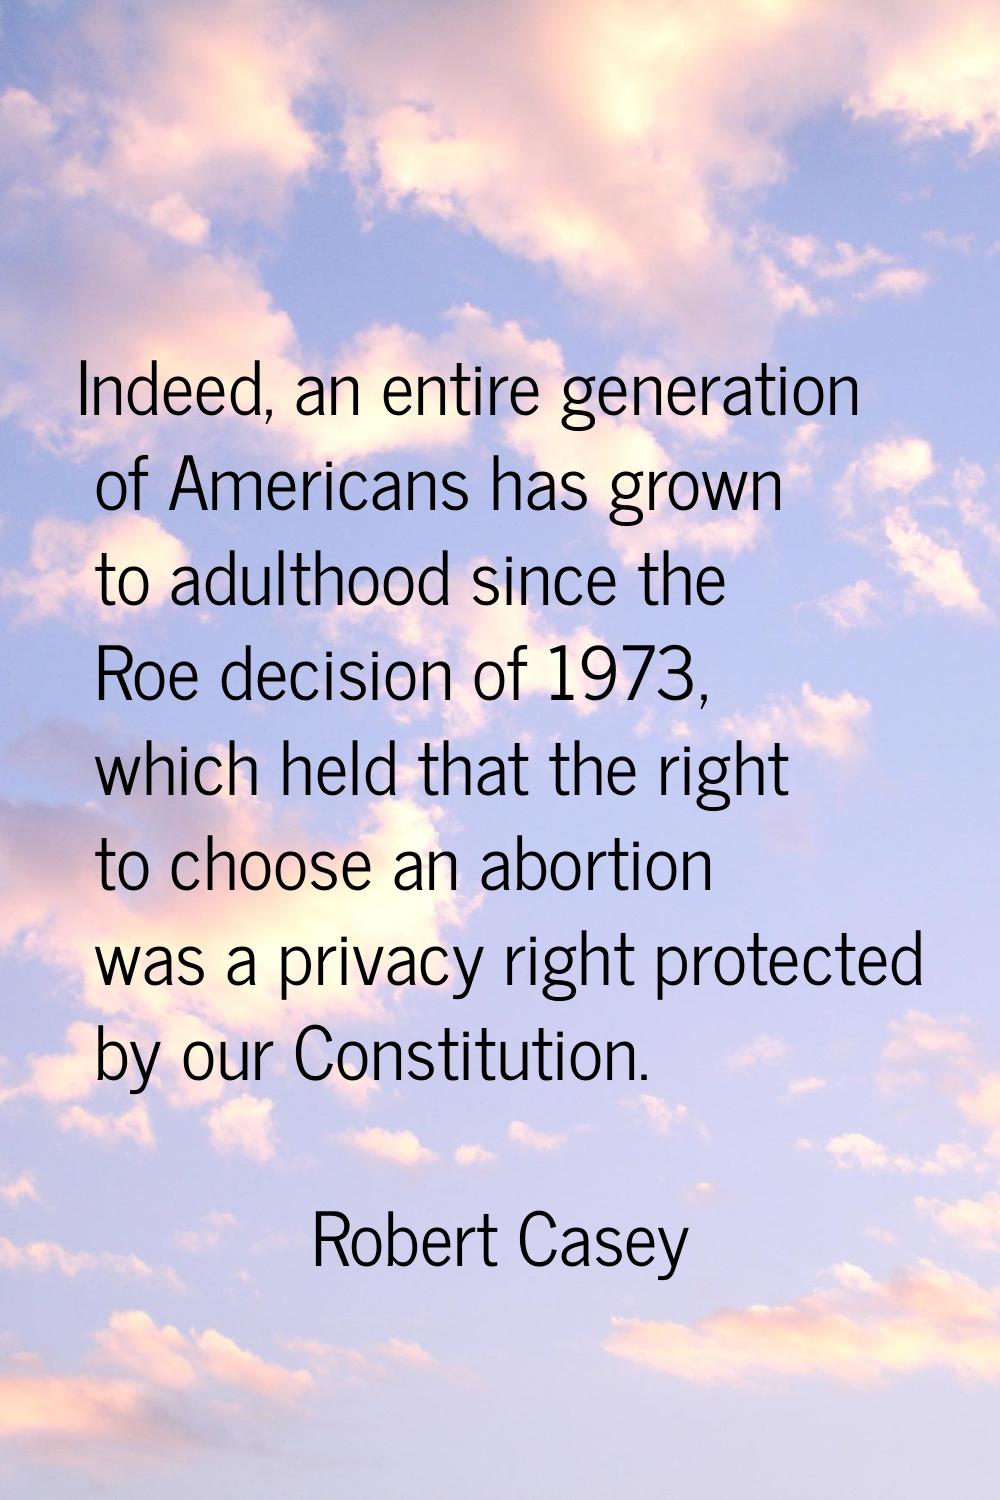 Indeed, an entire generation of Americans has grown to adulthood since the Roe decision of 1973, wh